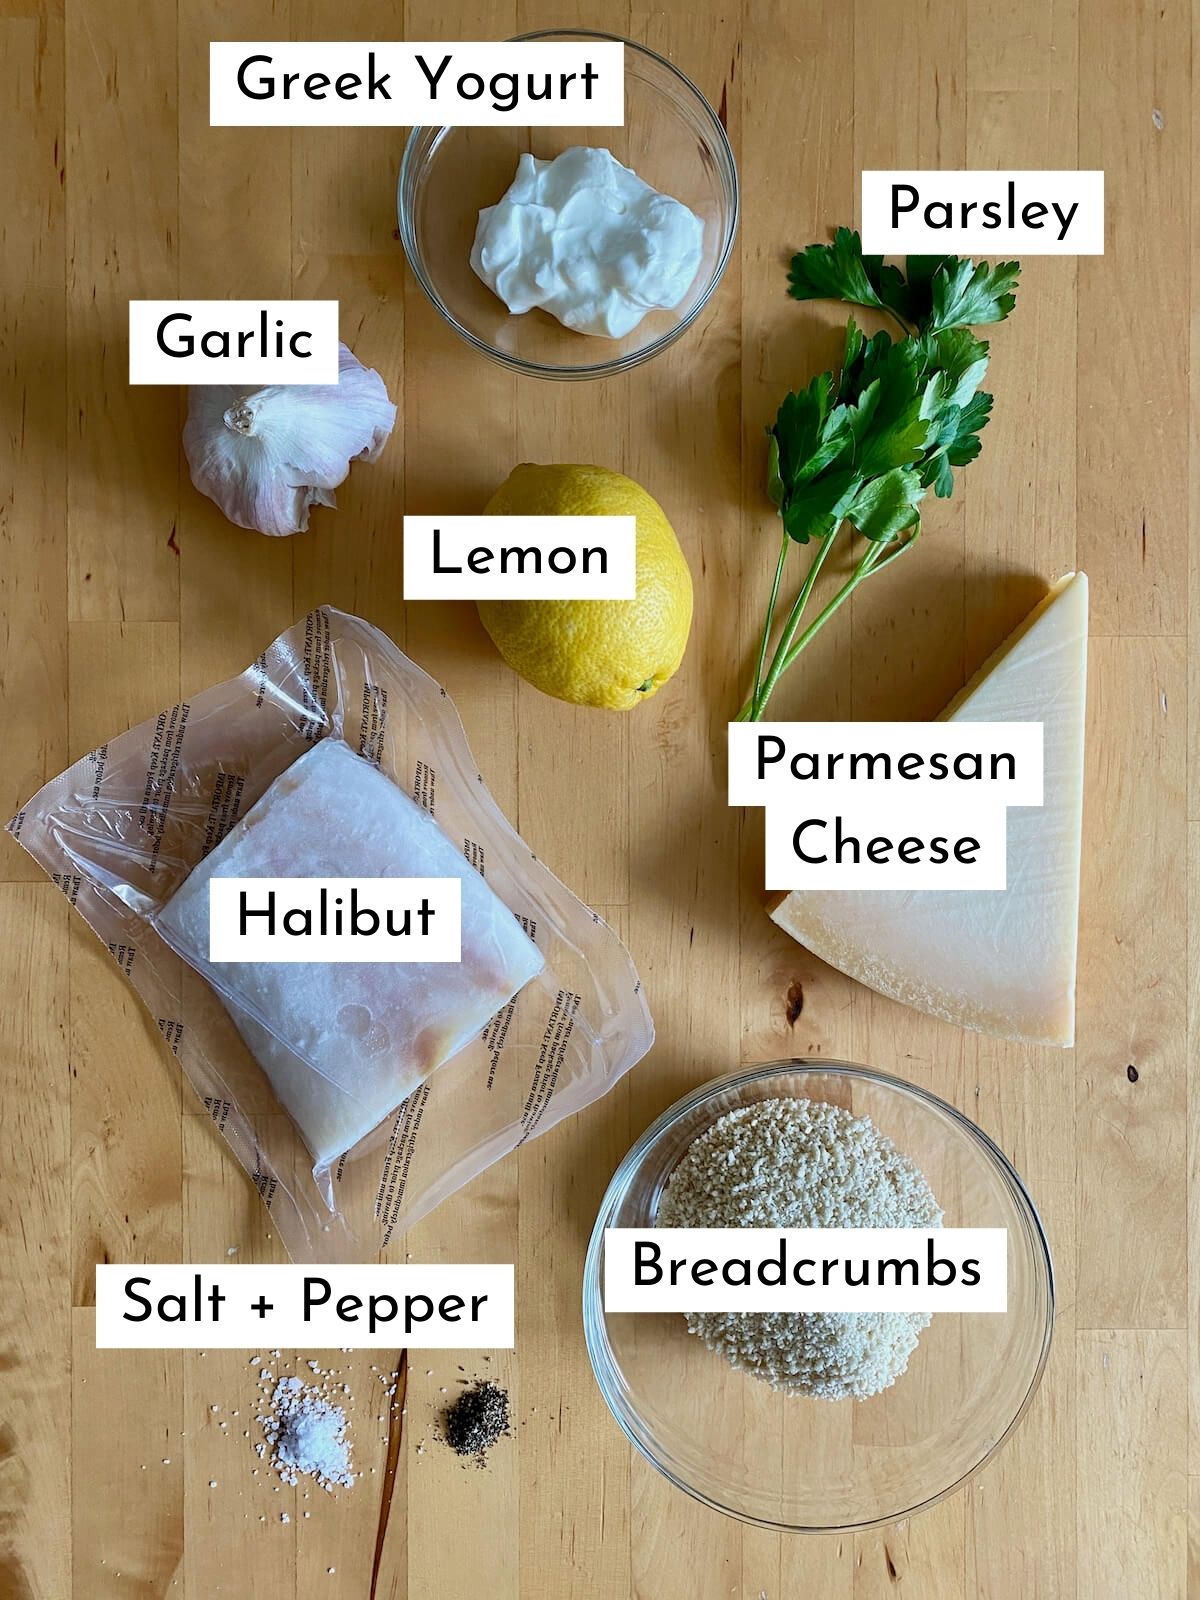 The ingredients to make air fryer halibut on a wooden countertop. The ingredients are labeled with text and they include Greek yogurt, garlic, lemon, parsley, halibut, parmesan cheese, breadcrumbs, salt, and pepper.